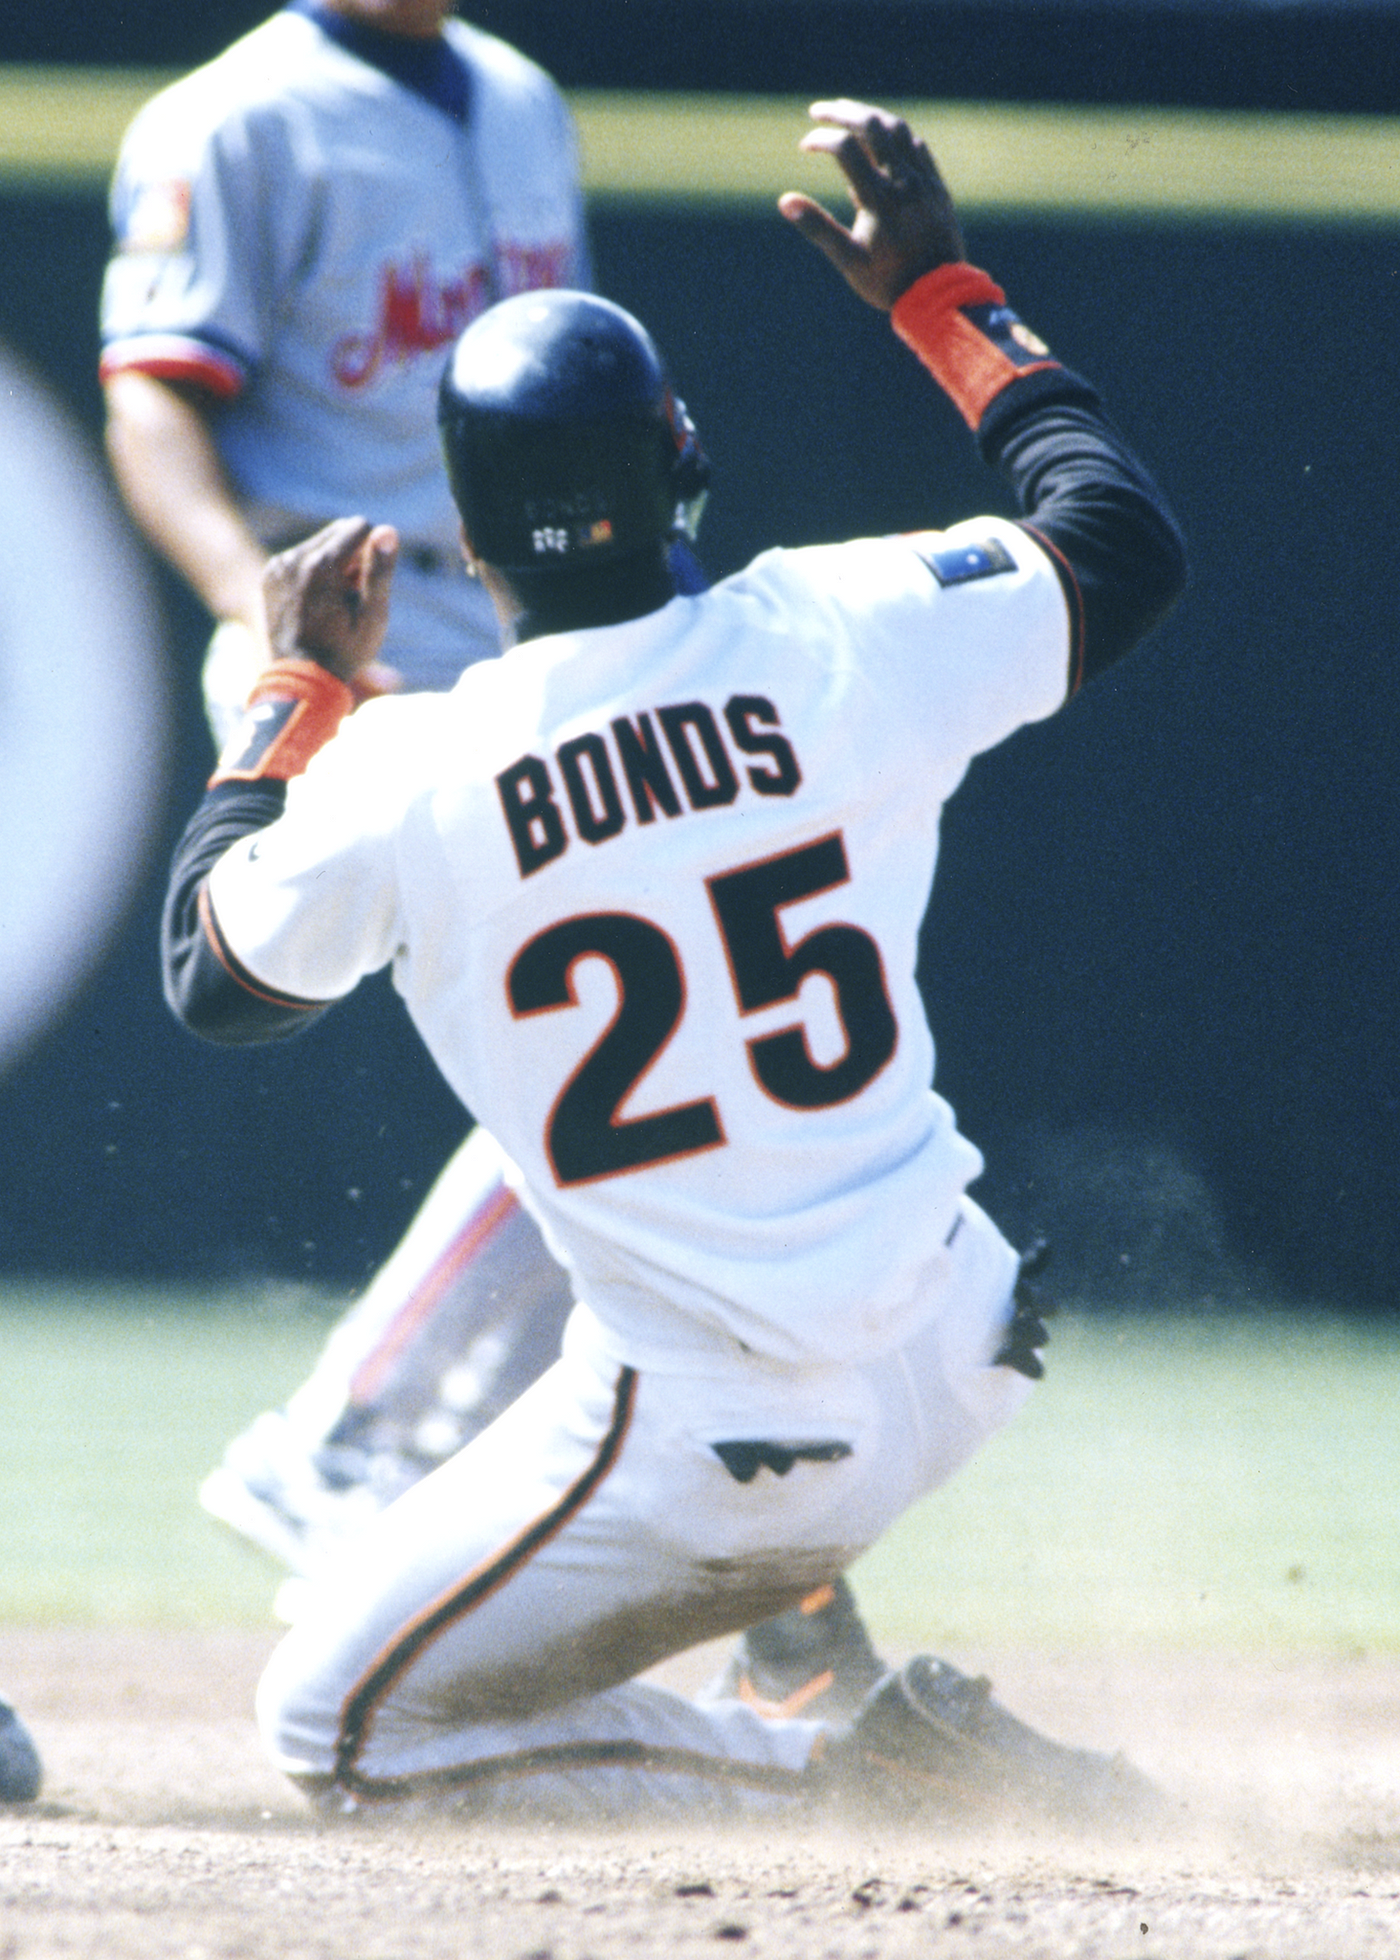 OTD: 16 Years Ago Barry Bonds Became the Only Member of the 500 HR/500  Stolen Base Club, by San Francisco Giants